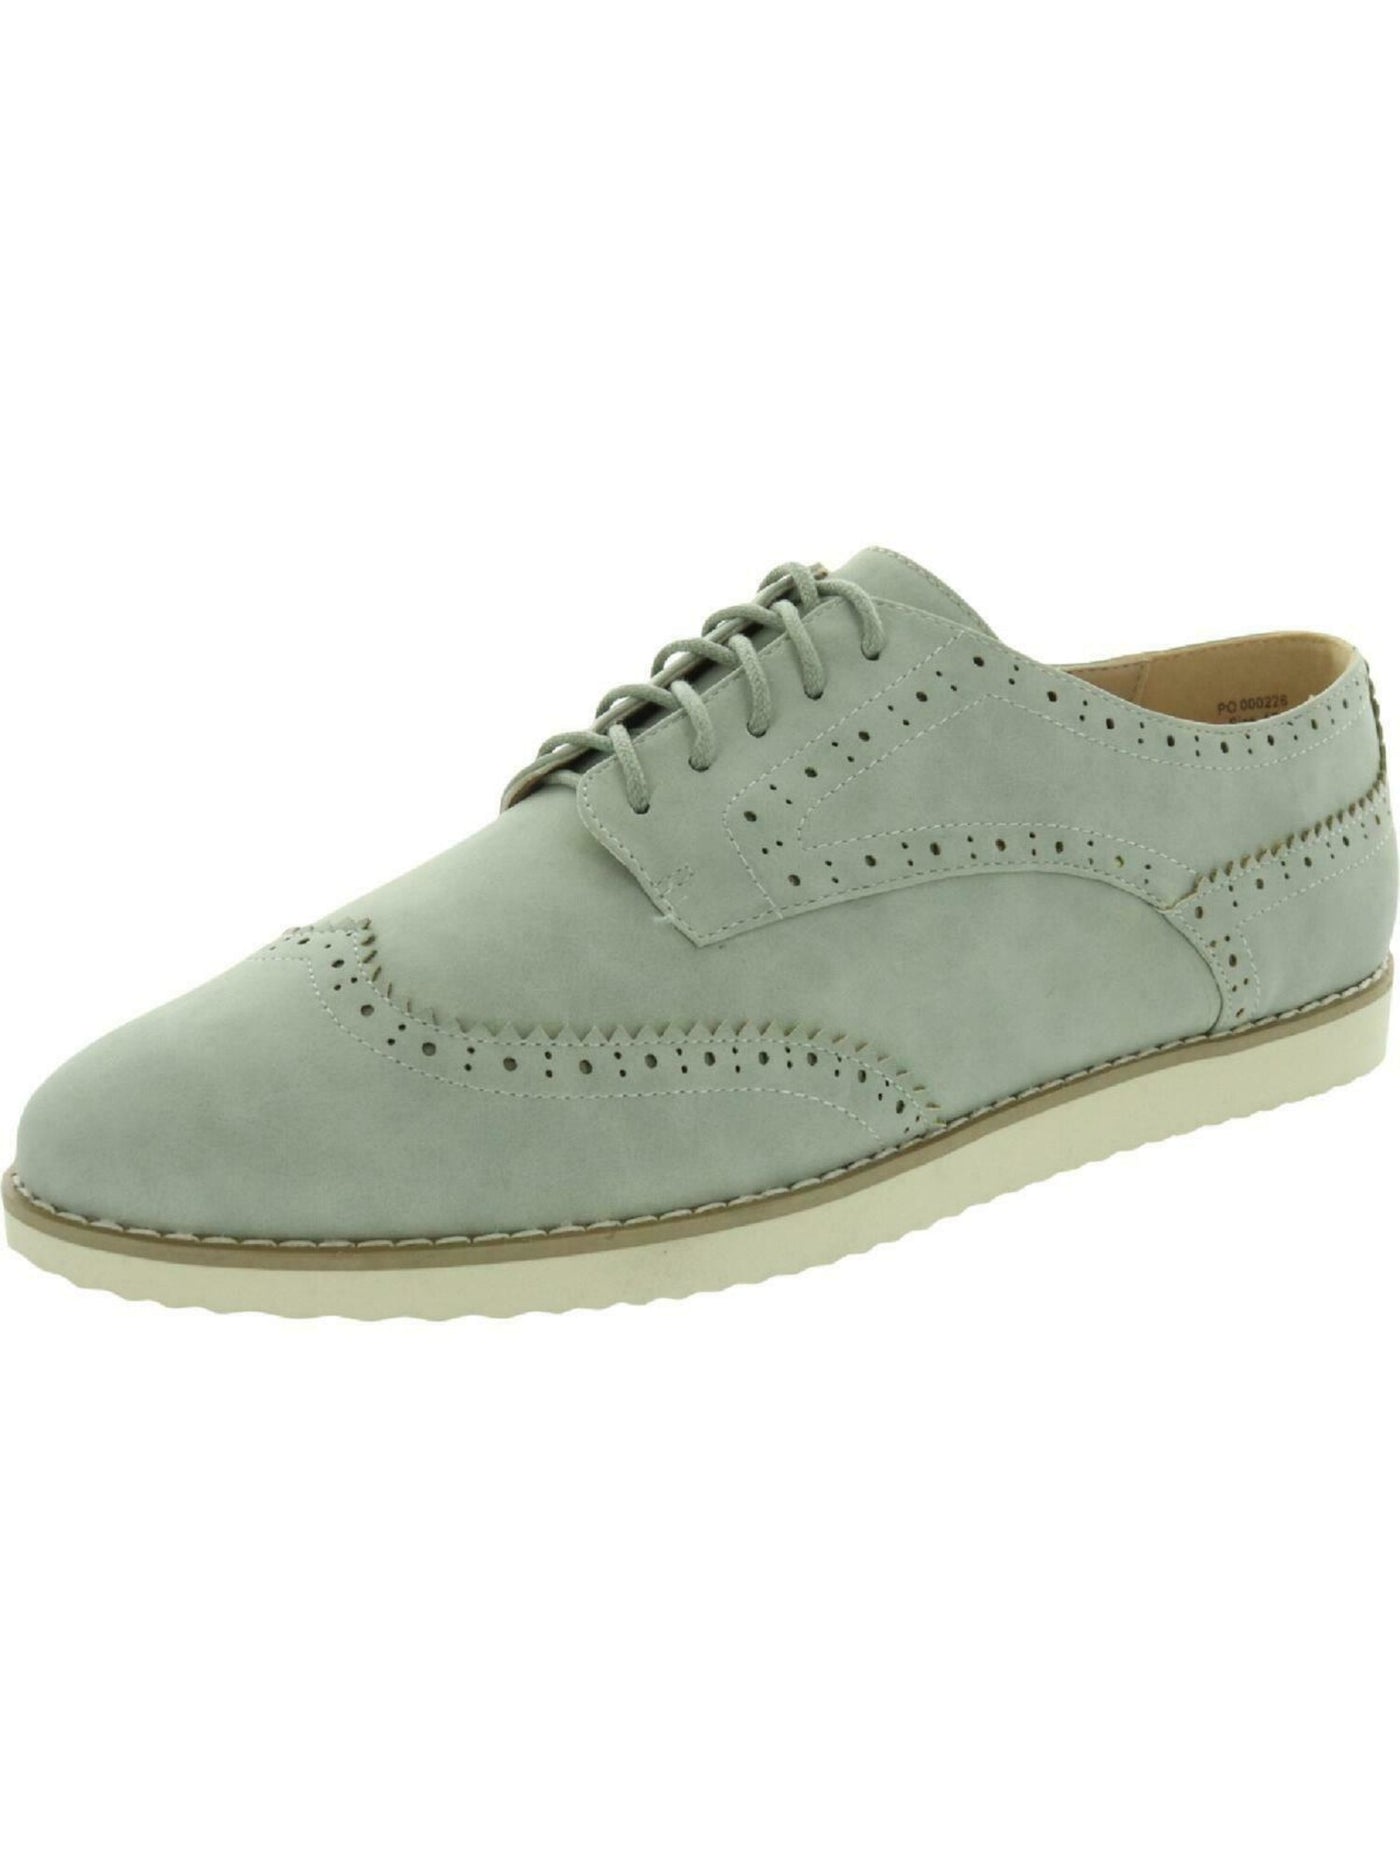 JOURNEE COLLECTION Womens Gray Wingtip Detail Cushioned Sissy Almond Toe Lace-Up Loafers Shoes 6